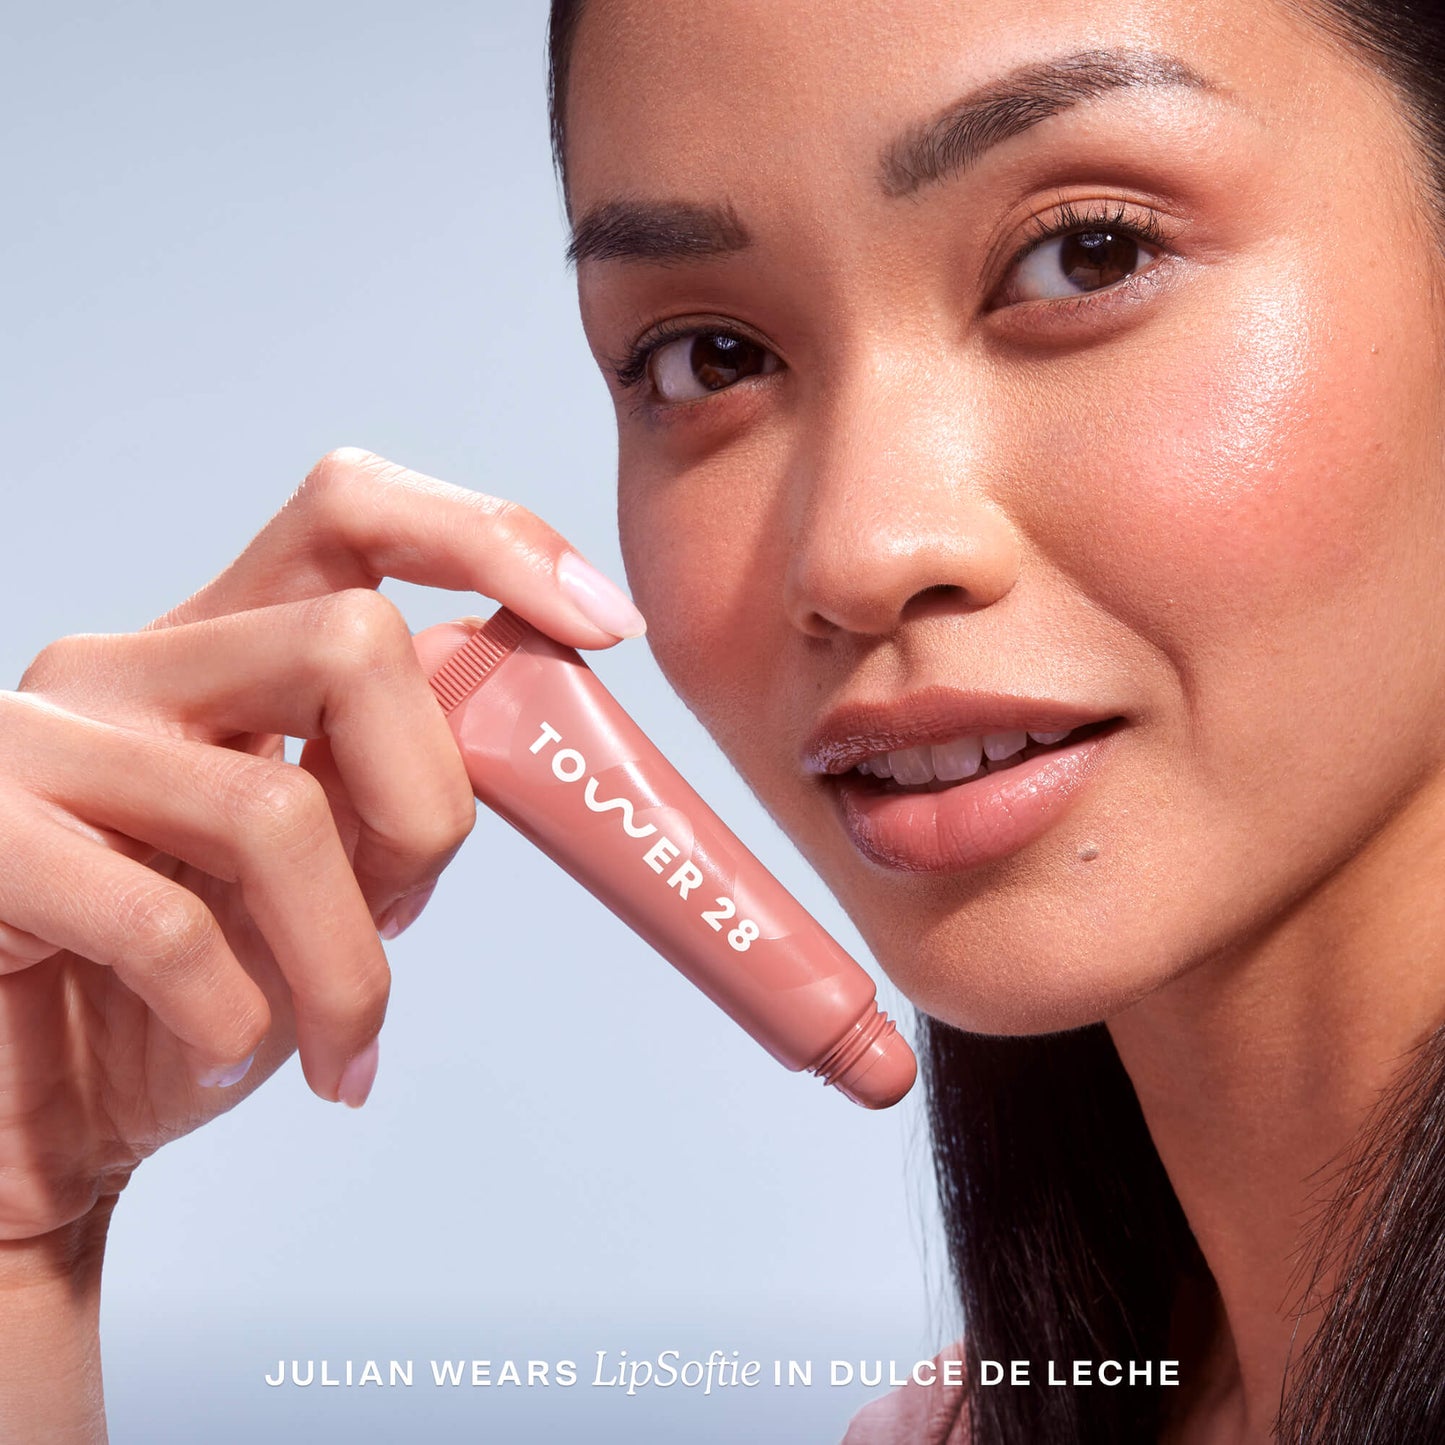 [Shared: A close up of a model holding Tower 28 Beauty's LipSoftie™ Lip Treatment in Dulce de Leche and wearing it on her lips]